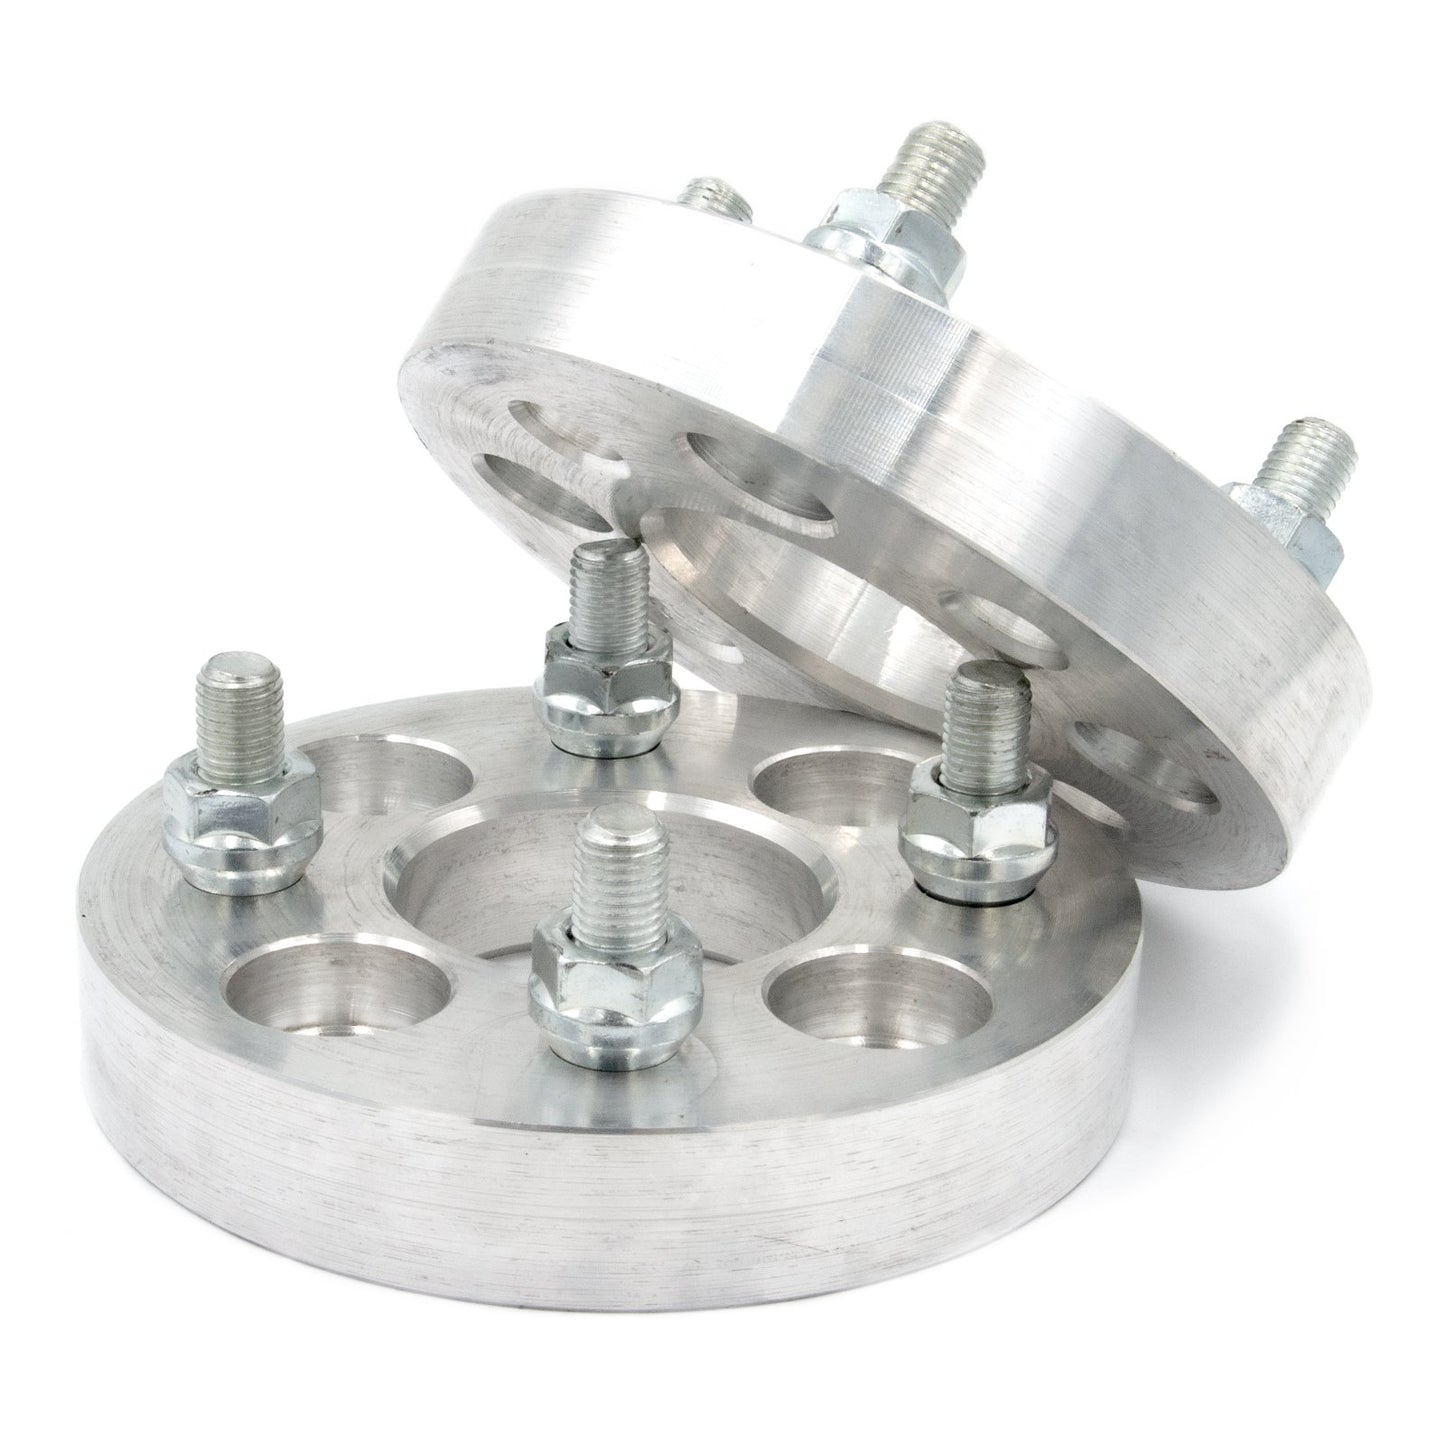 4x98 to 4x100 Wheel Spacer/Adapter - Thickness: 3/4"- 4"